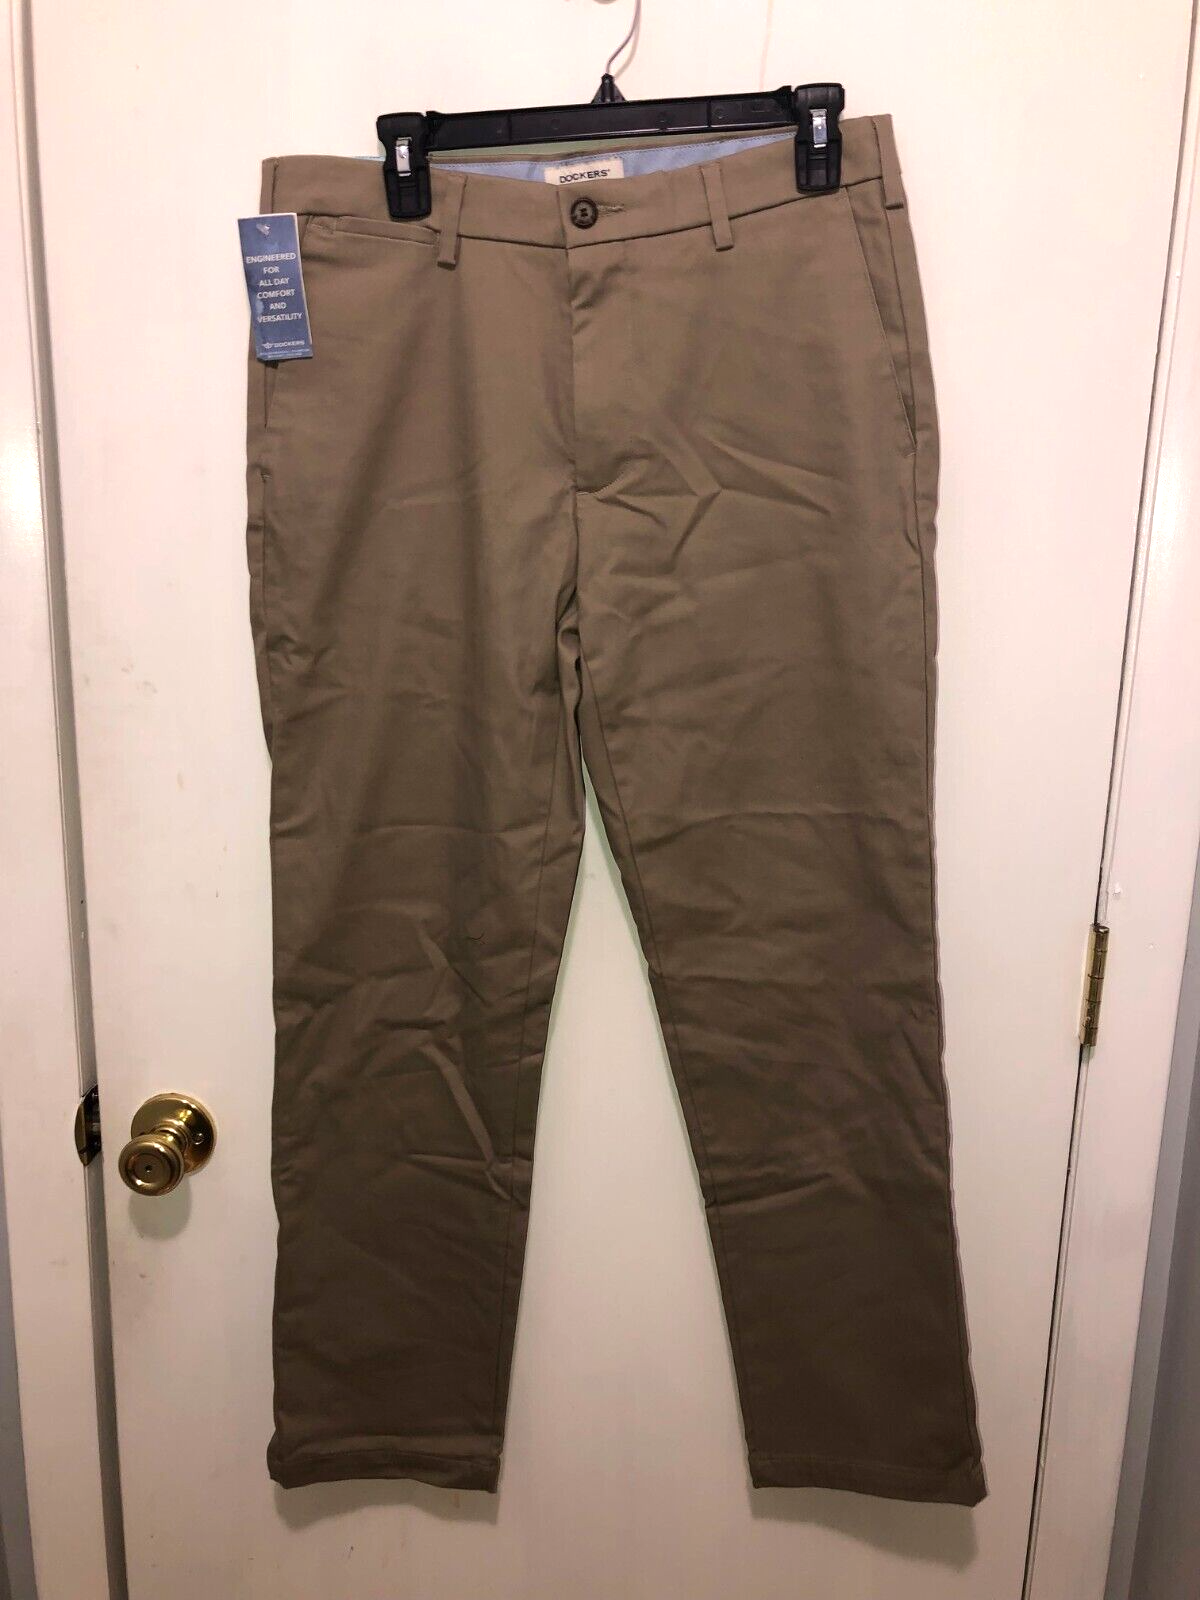 Primary image for NWT Dockers The Clean Khaki Slim Tapered FIt Mens Pants 31X30 Comfort Waistband